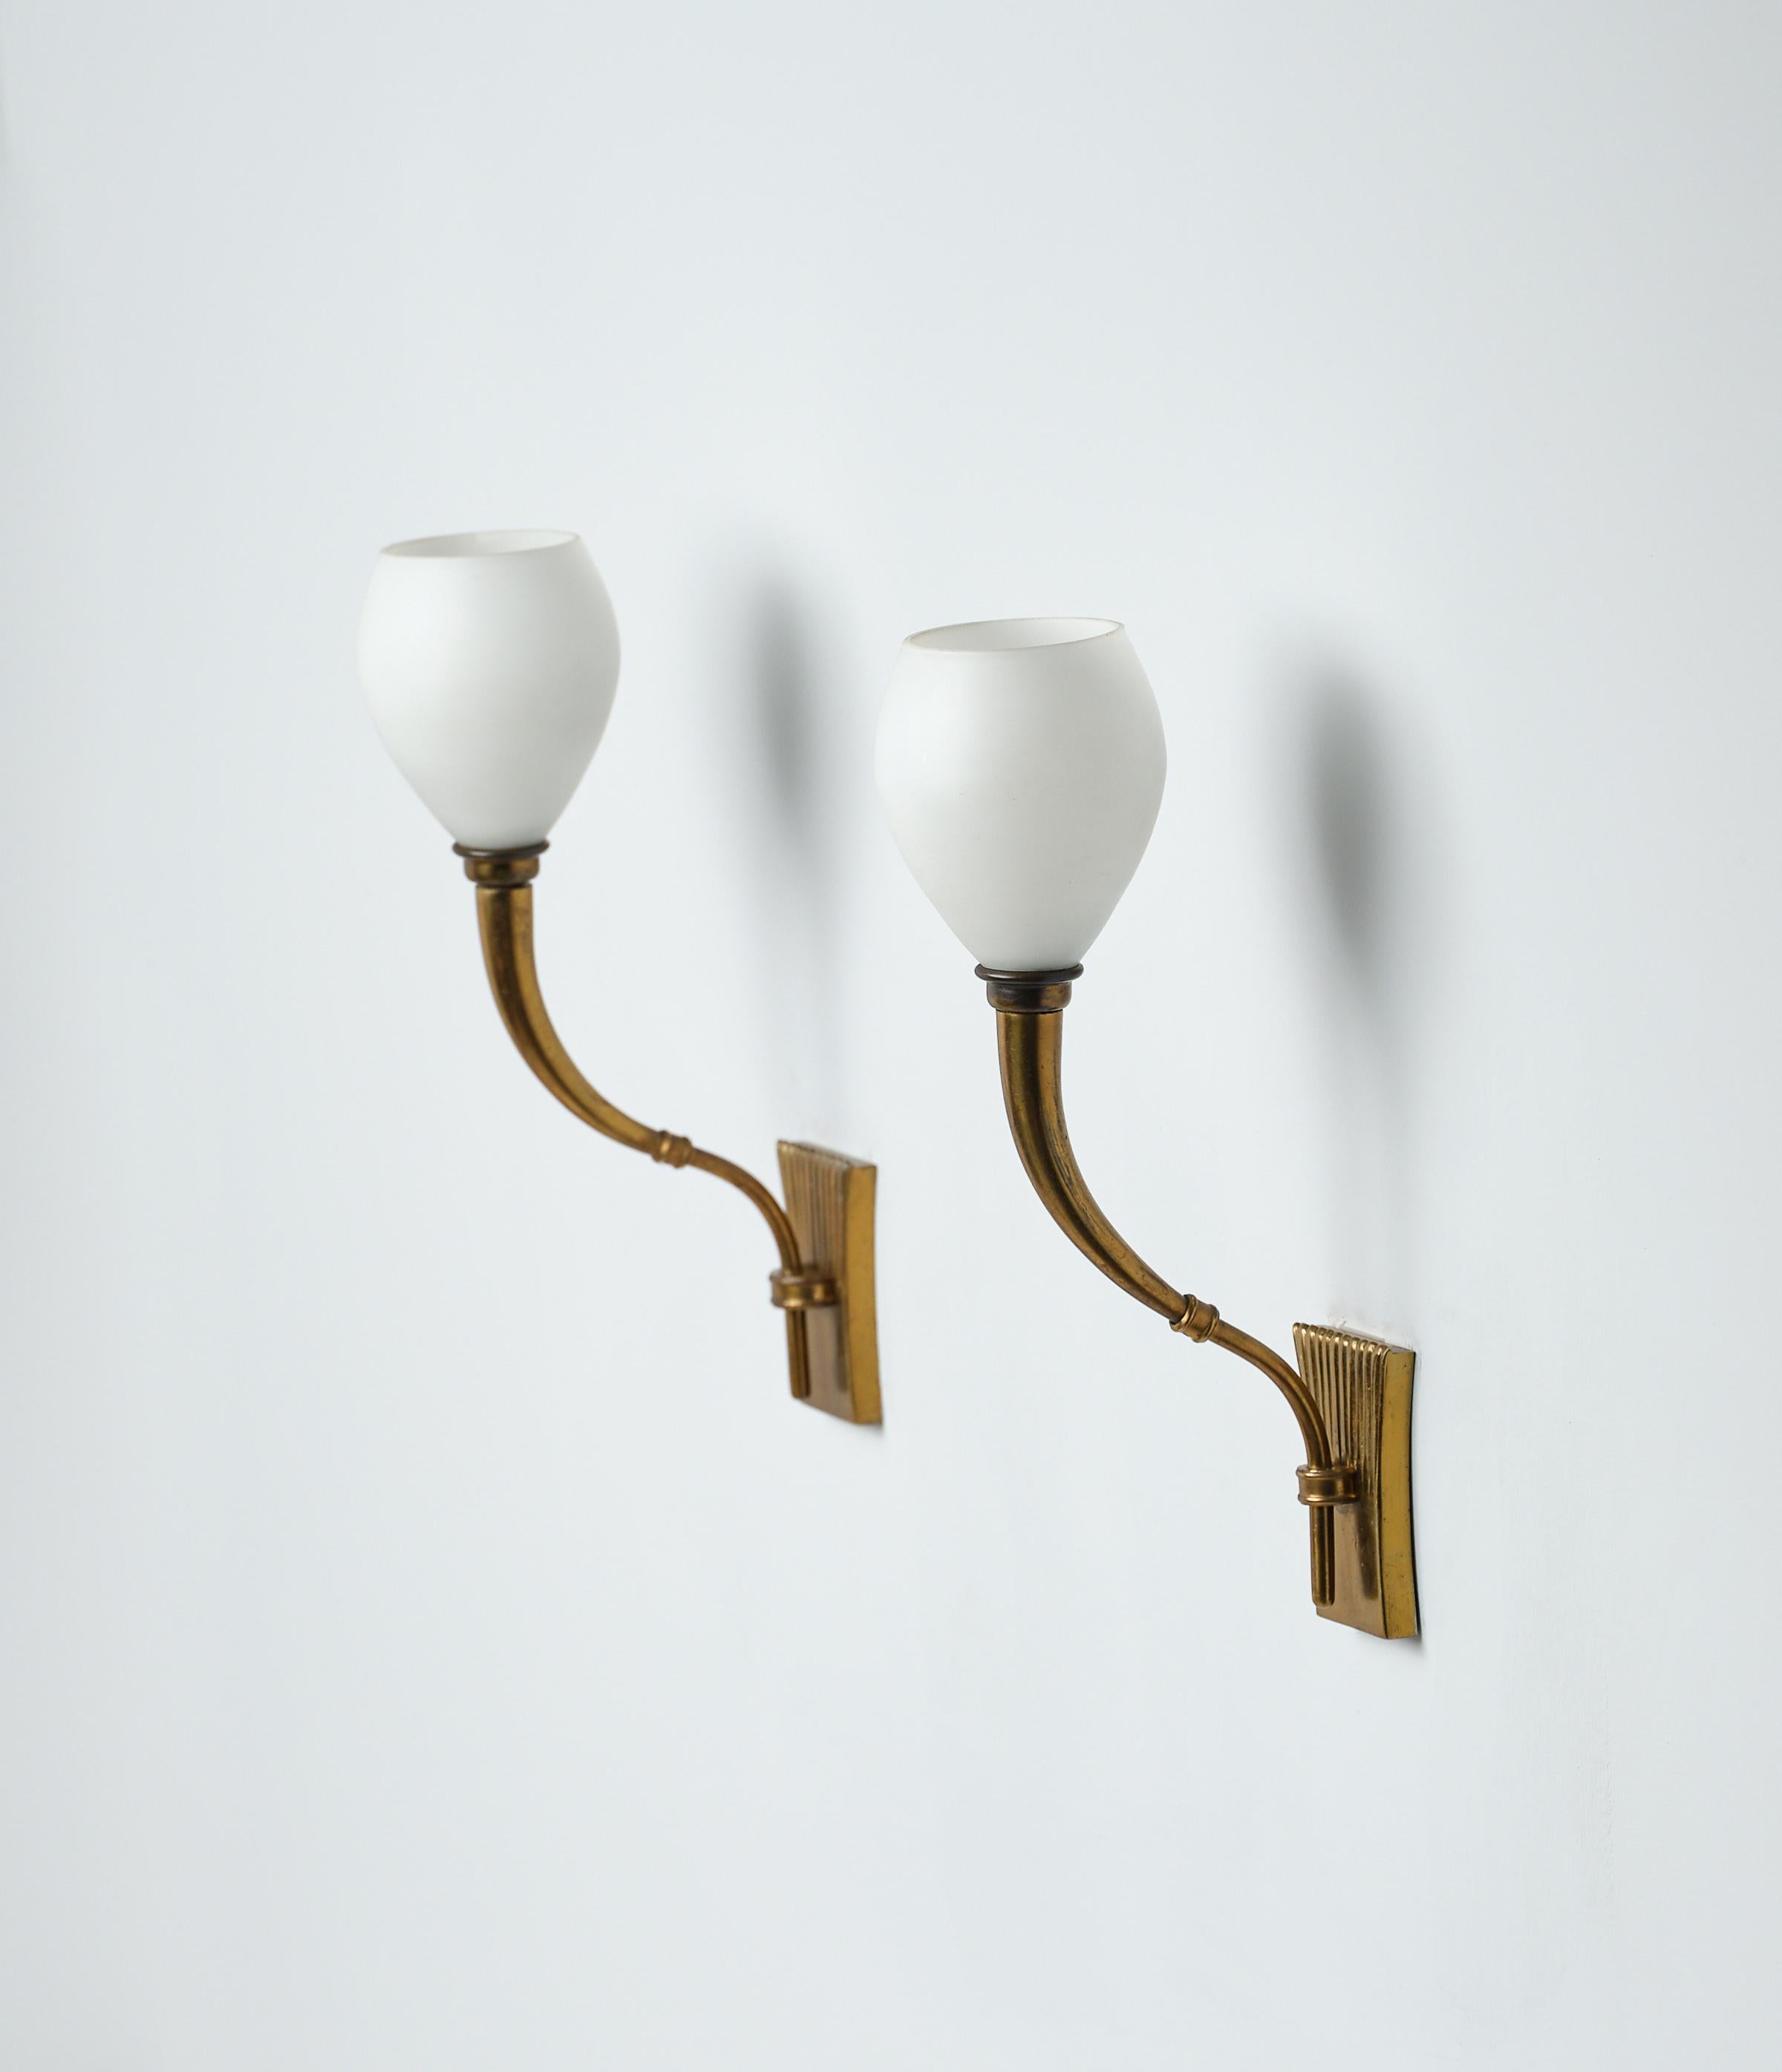 Discover timeless elegance from our collection of vintage Italian wall lamps of the 1950s. These rare and precious pieces, attributed to the renowned 'Fontana Arte,' showcase exquisite design in brass and opaline glass. Each lamp exudes